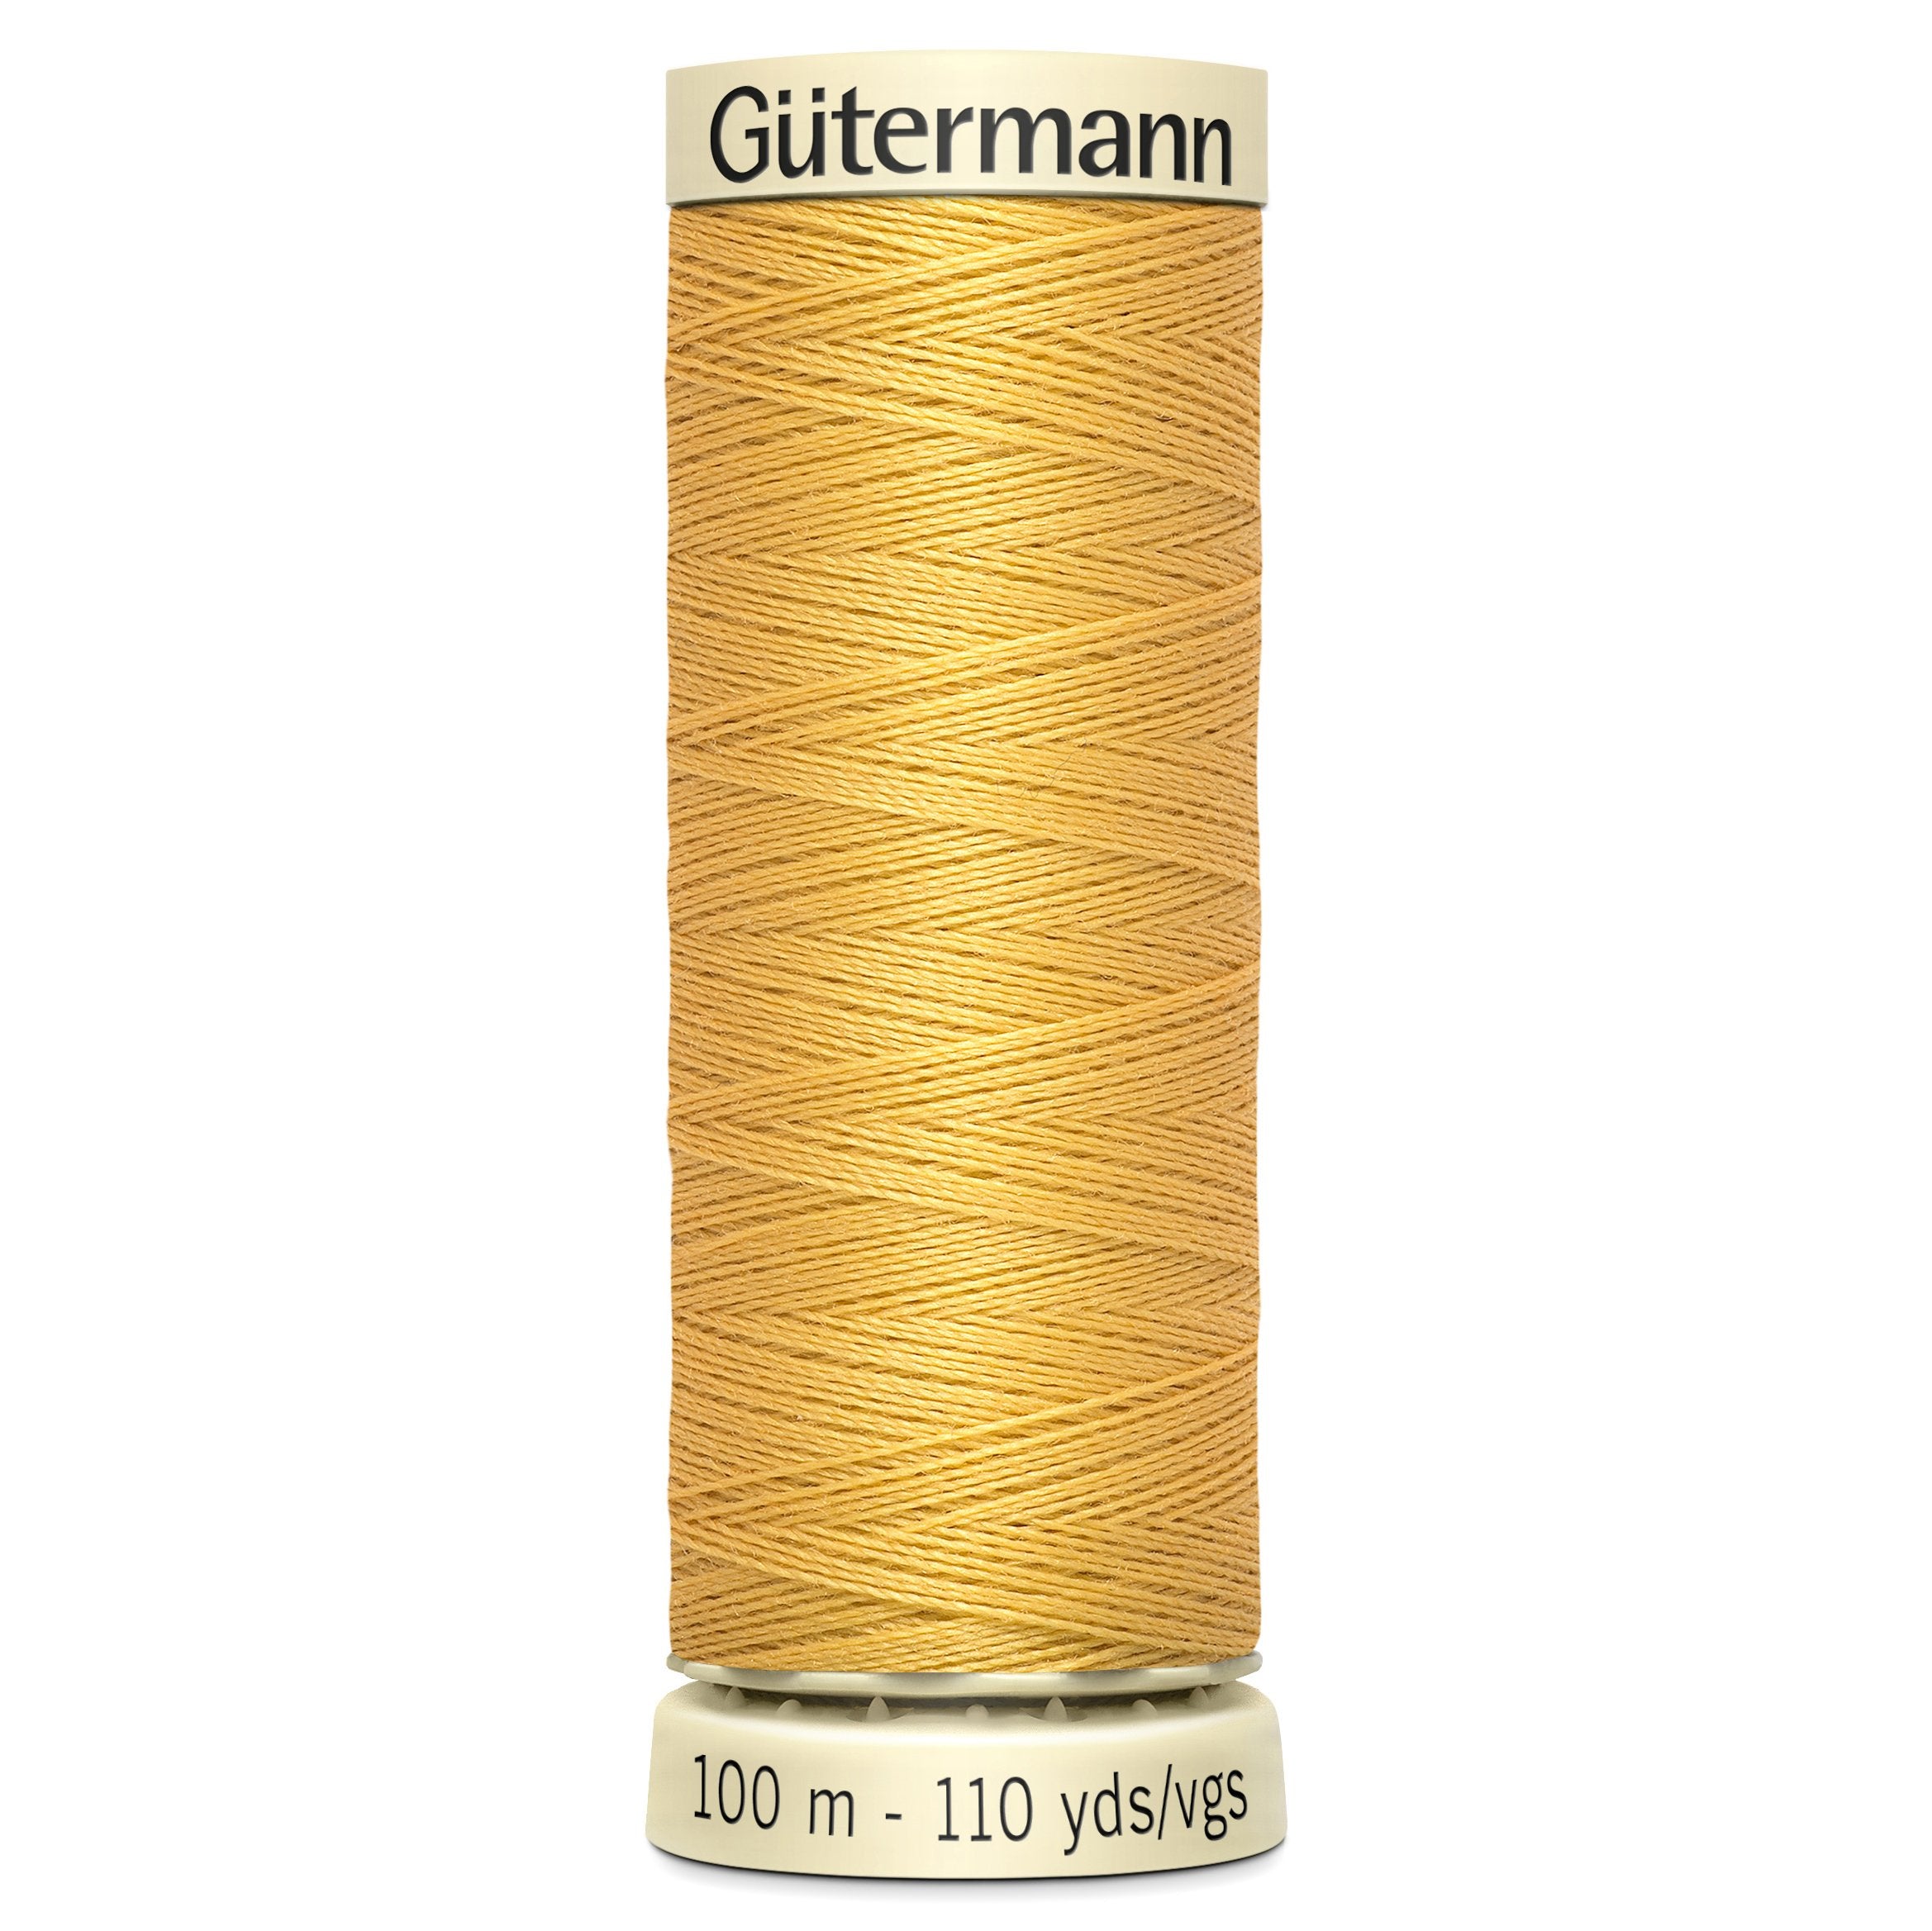 Gutermann Sew All Thread colour 488 Gold from Jaycotts Sewing Supplies